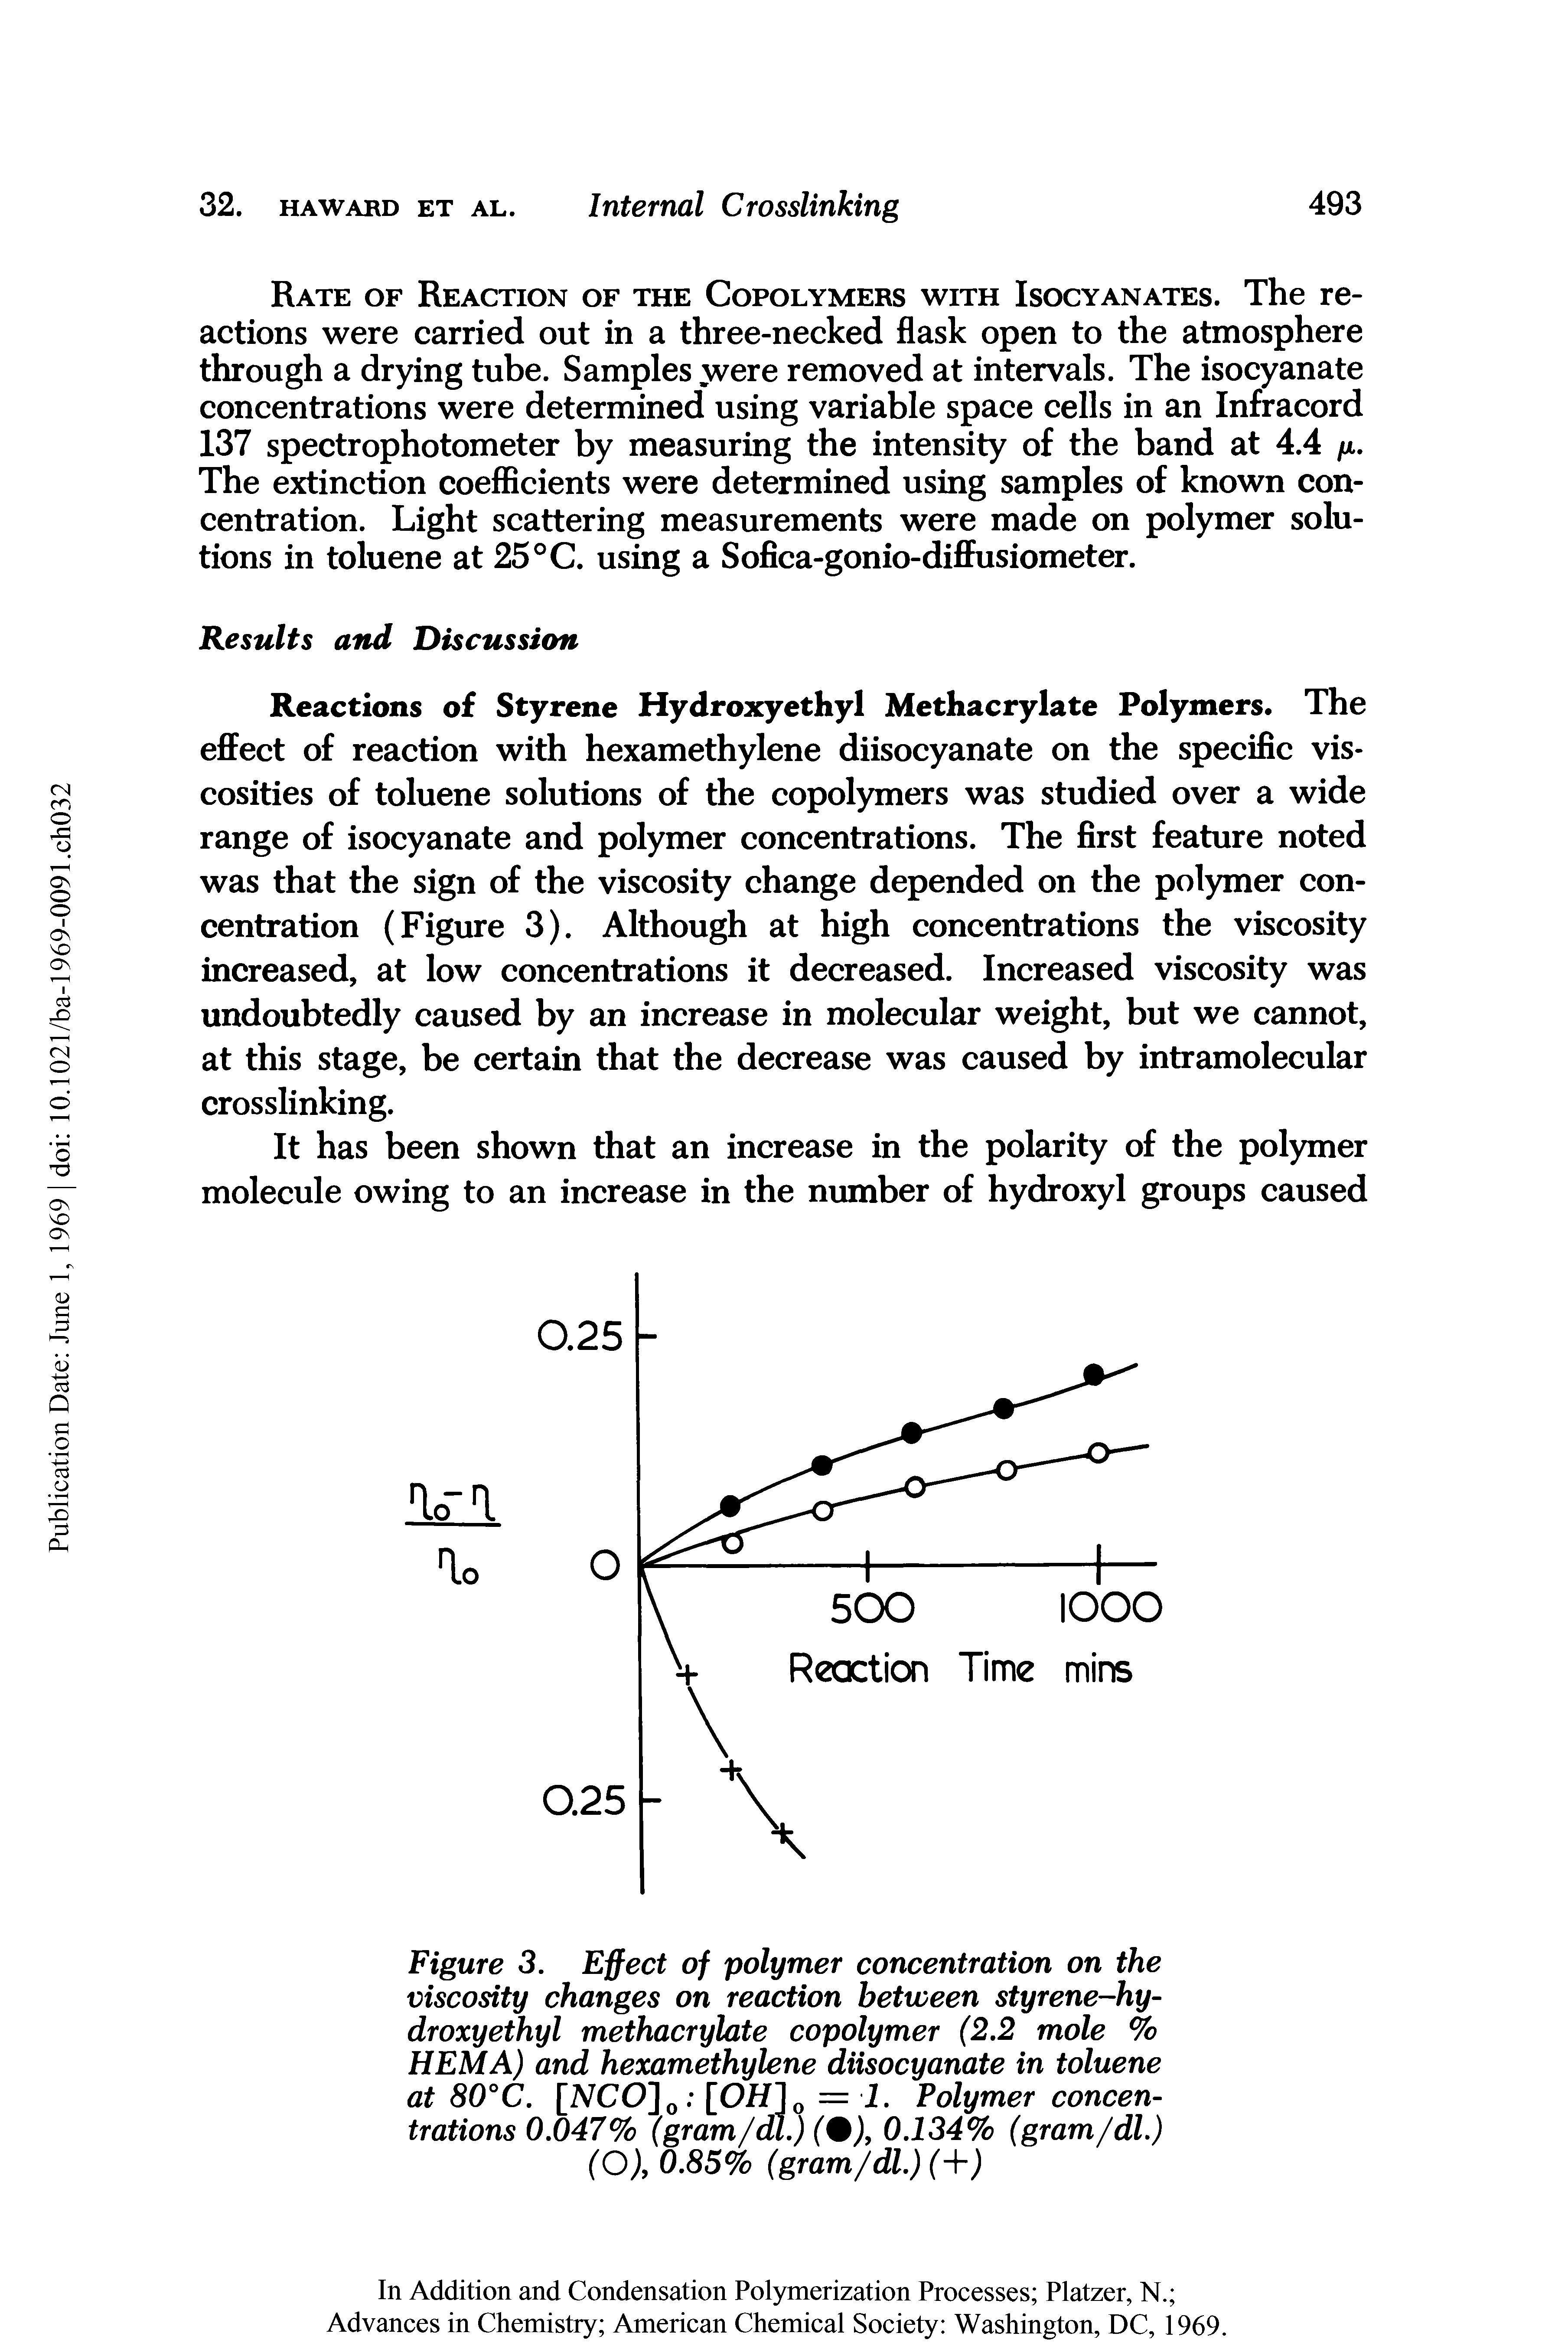 Figure 3. Effect of polymer concentration on the viscosity changes on reaction between styrene-hydroxy ethyl methacrylate copolymer (2.2 mole % HEMA) and hexamethylene diisocyanate in toluene at 80° C. [2VCO]0 [OH 0 = 1. Polymer concentrations 0.047% (gram/dl.) (%), 0.134% (gram/dl.)...